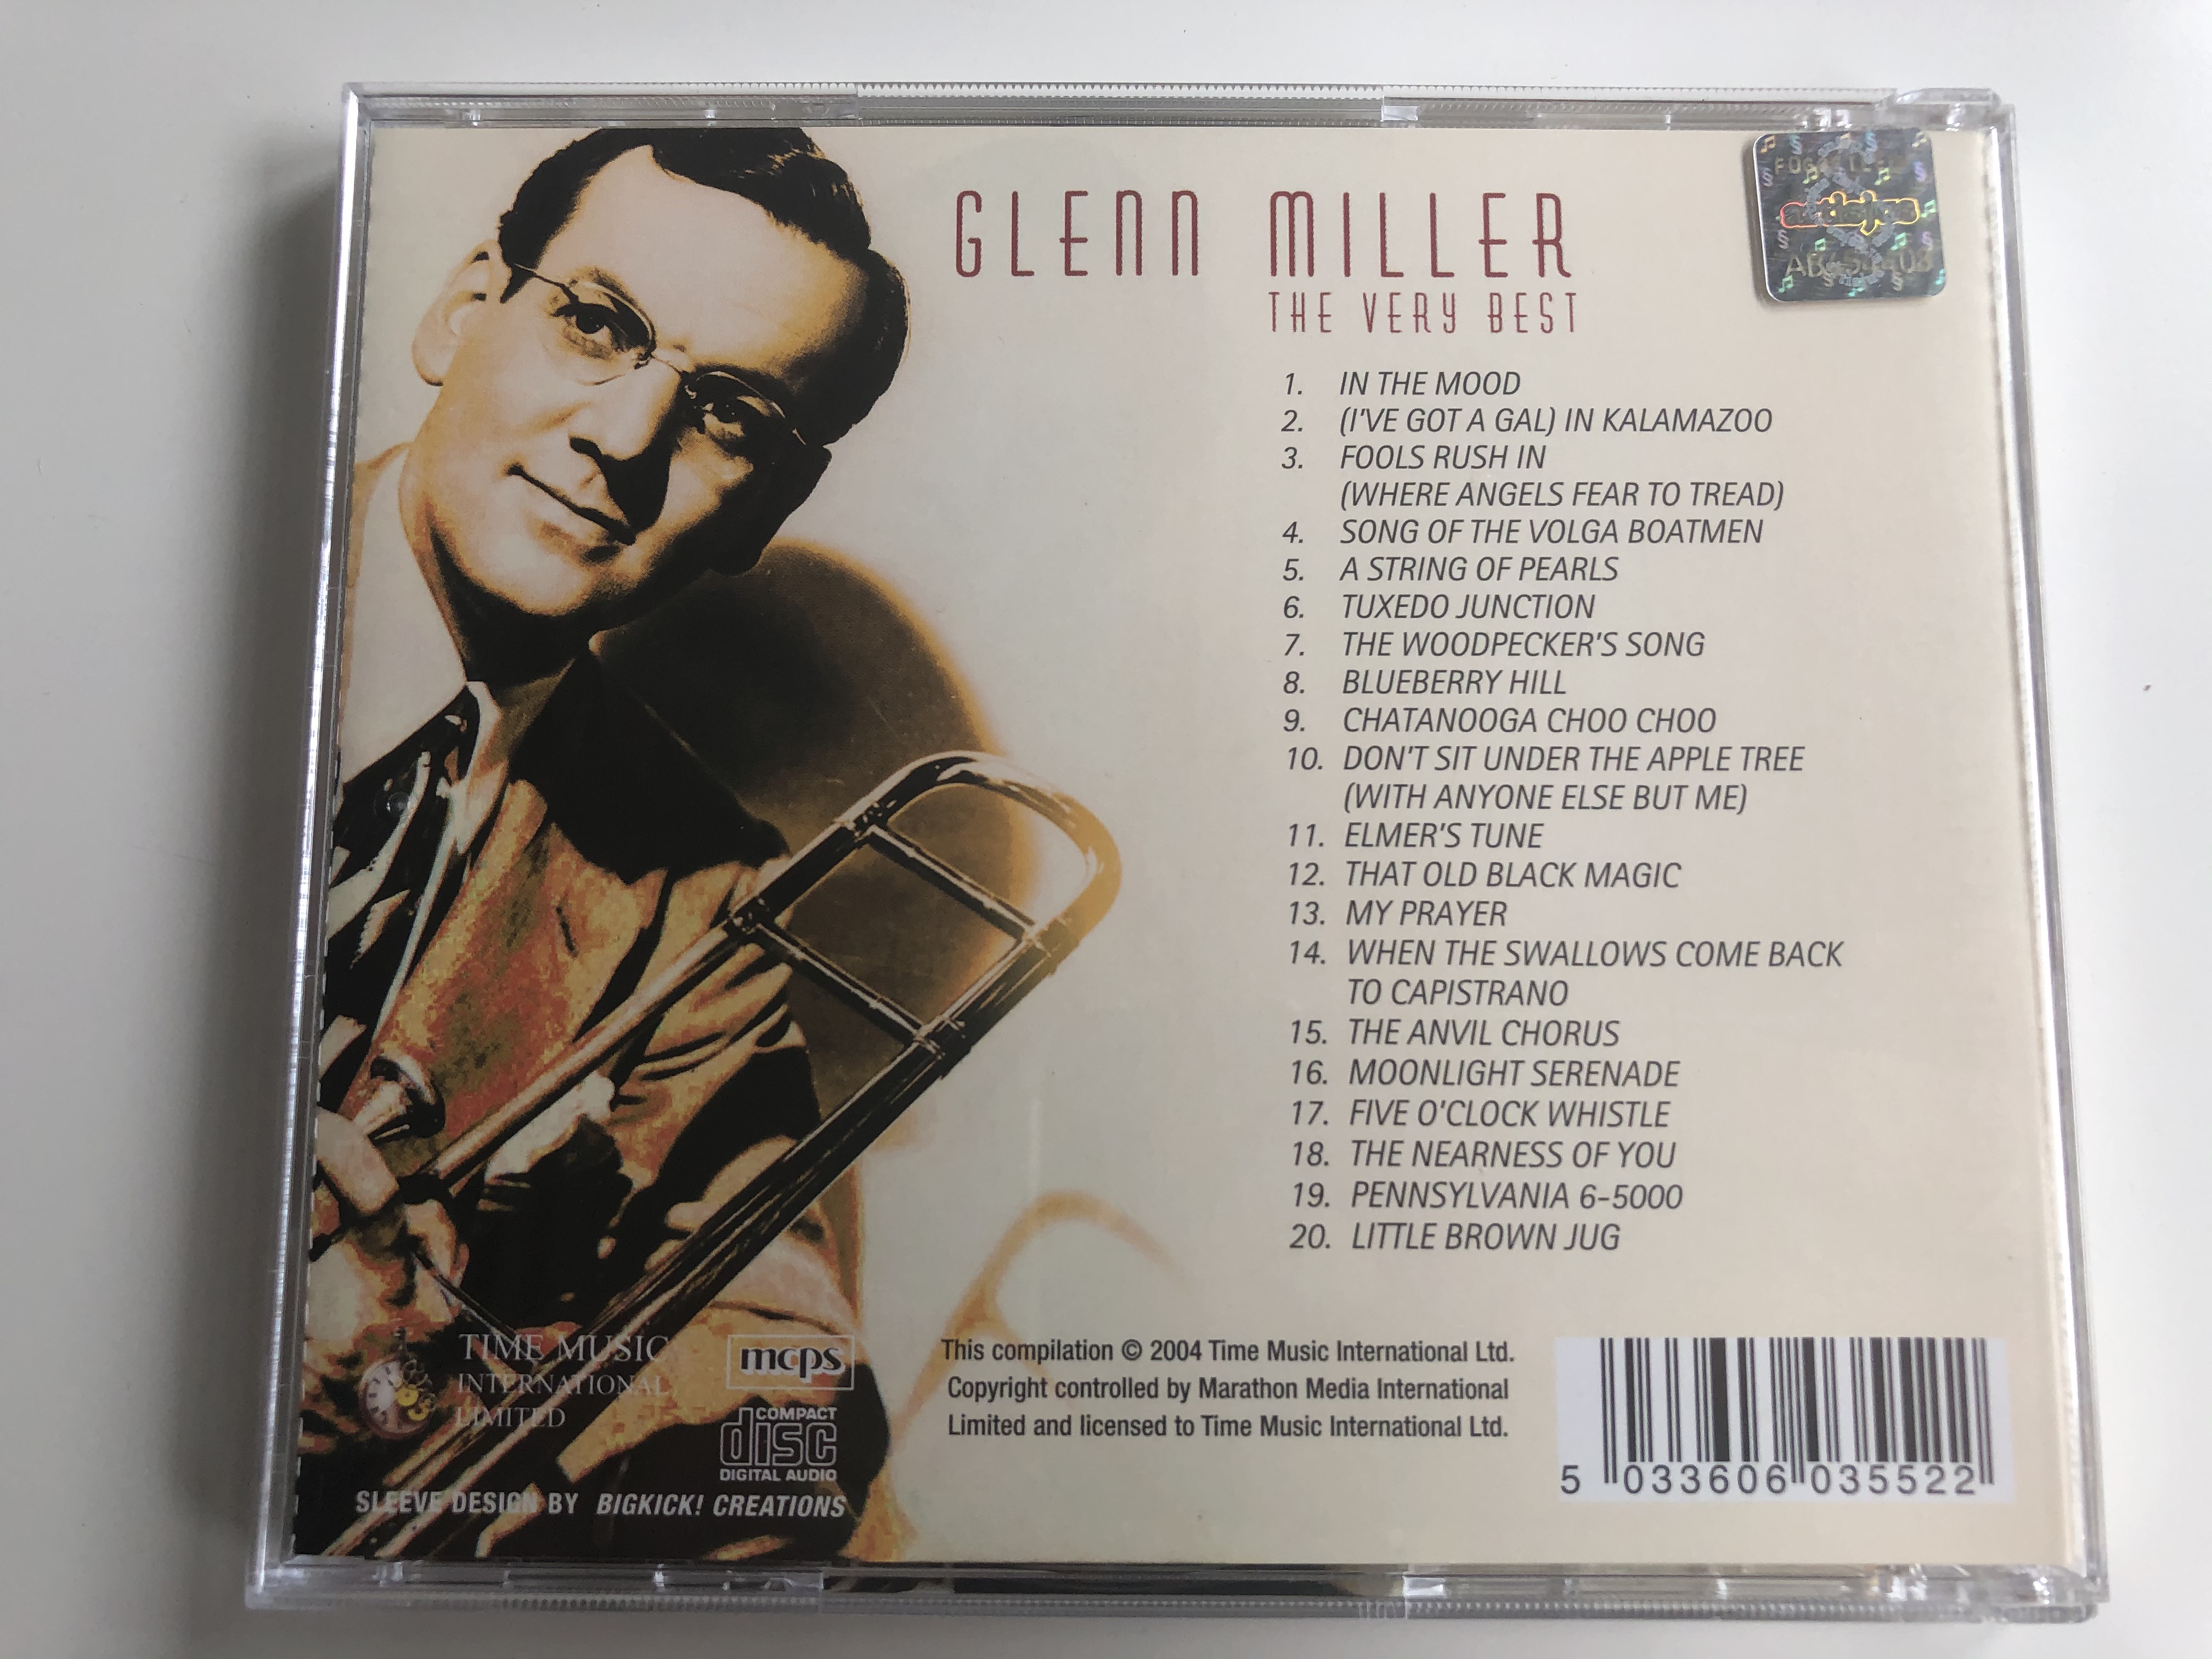 glenn-miller-the-very-best-of-in-the-mood-pennsylvania-6-5000-little-brown-jug-tuxedo-junction-and-many-more-time-is-international-limited-audio-cd-2004-tmi355-4-.jpg